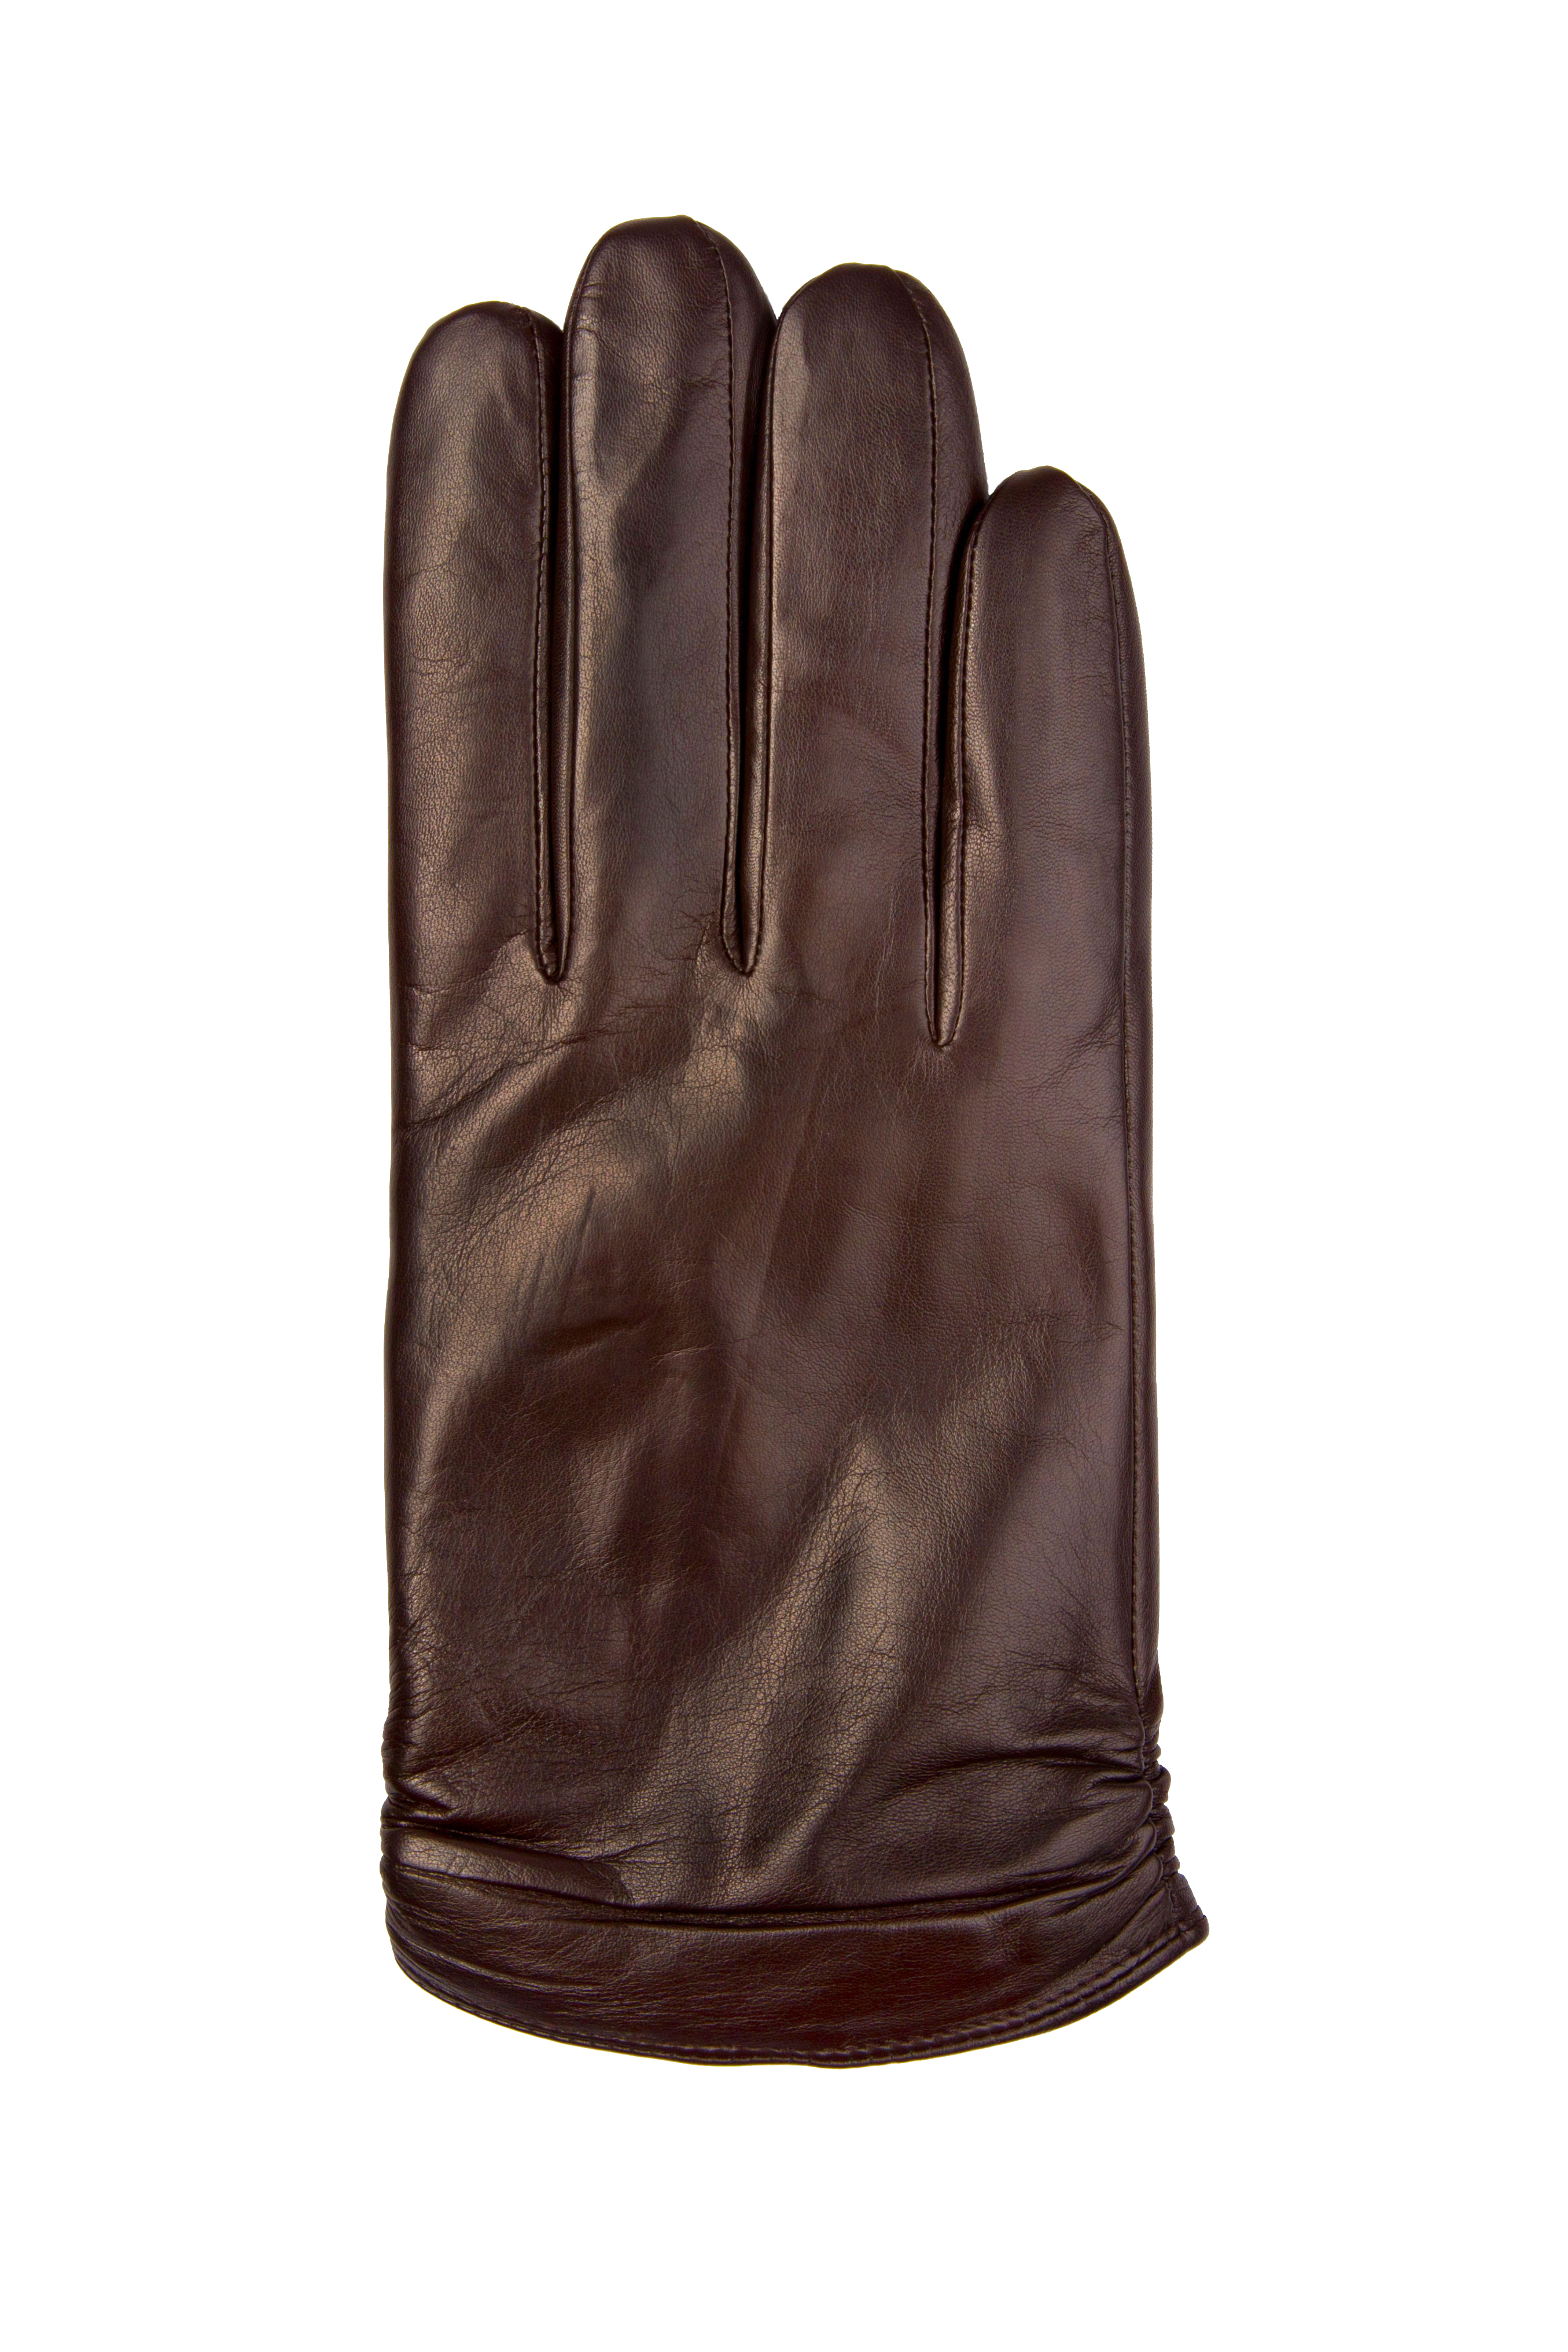 Leather Dress Gloves with Long Fingers 